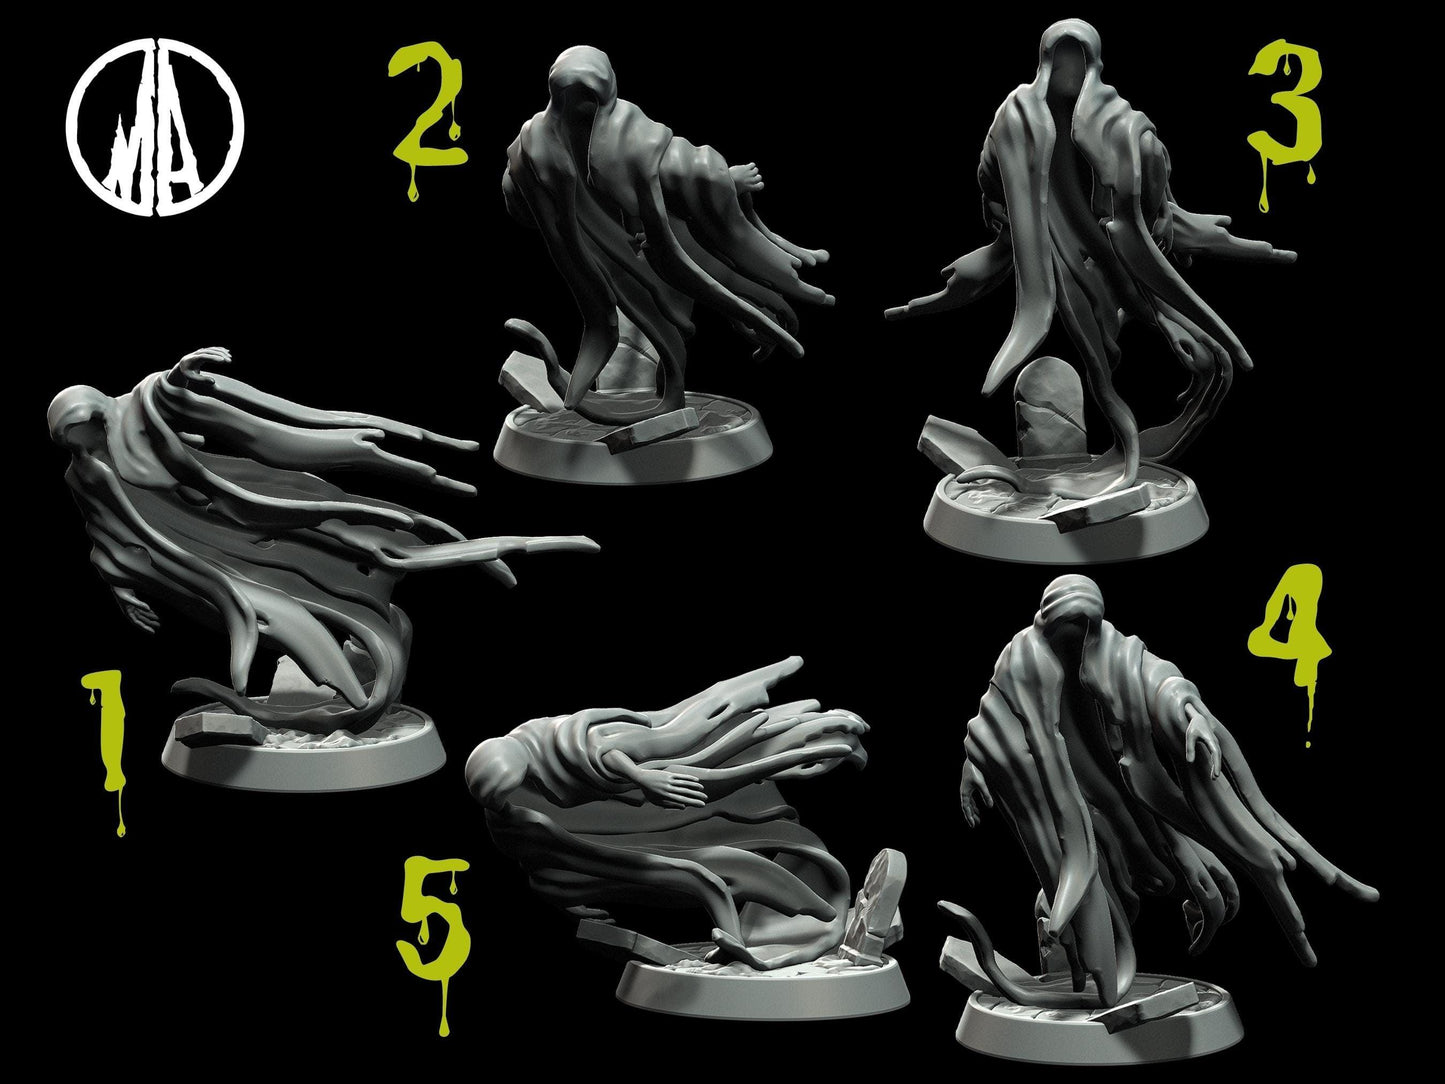 Ghost Miniature ghost figurine - 5 Poses - 28mm scale Tabletop gaming DnD Miniature Dungeons and Dragons,dnd 5e ghost figurine - Plague Miniatures shop for DnD Miniatures